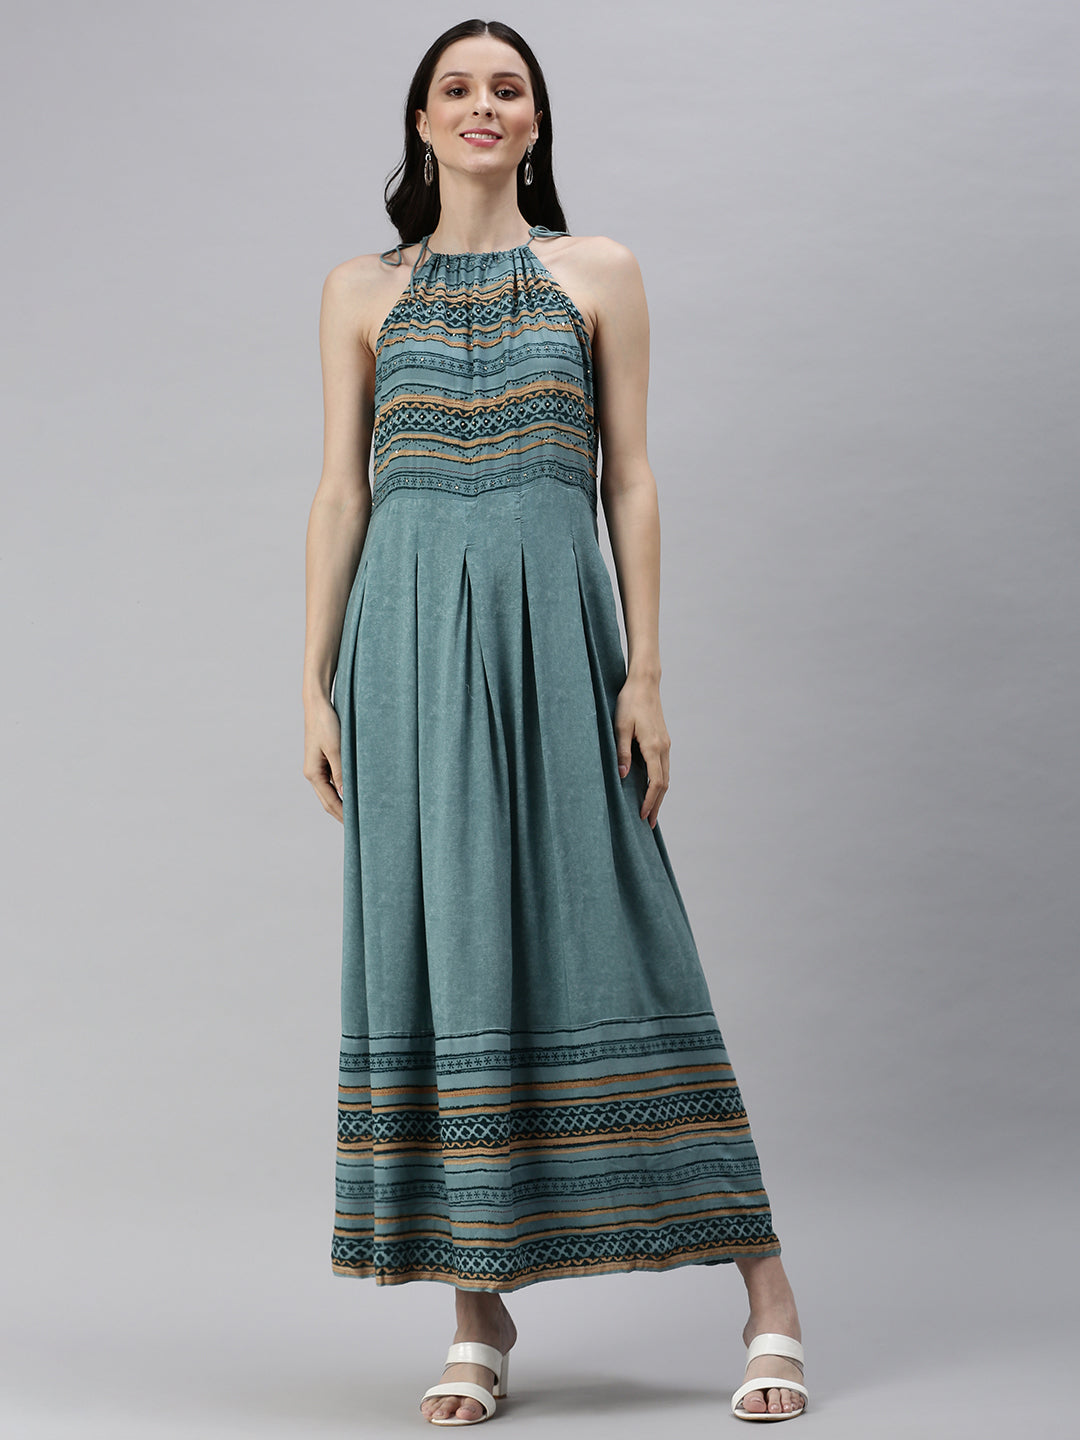 Women's Ethnic Motifs Blue Fit and Flare Dress